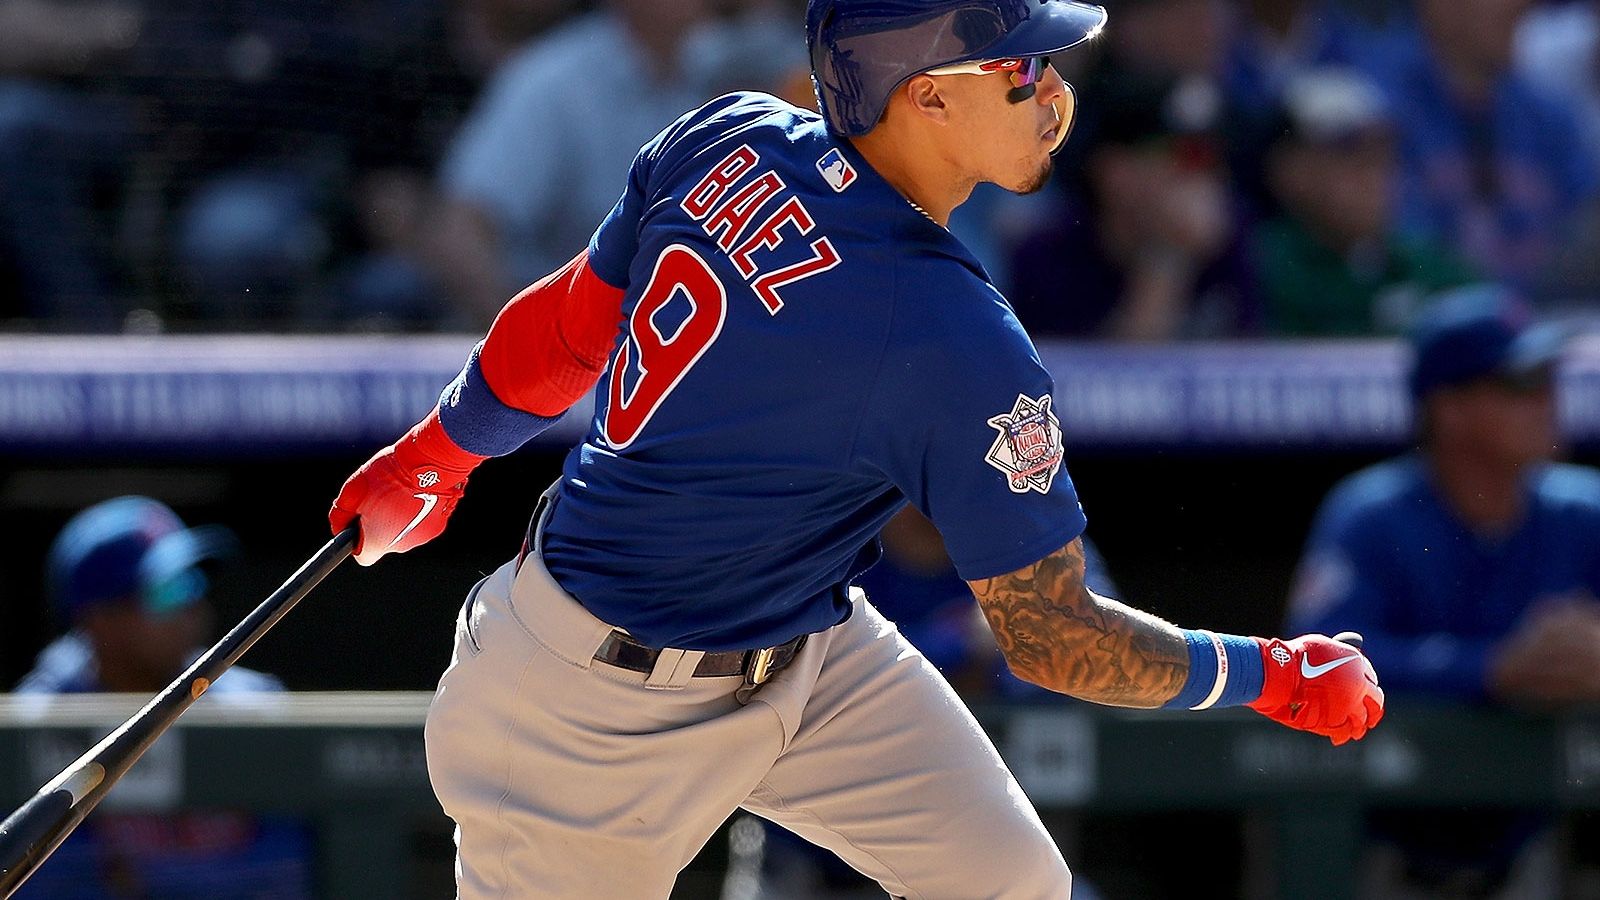 Free download Javier Baez Wallpapers 93 image in Collection.